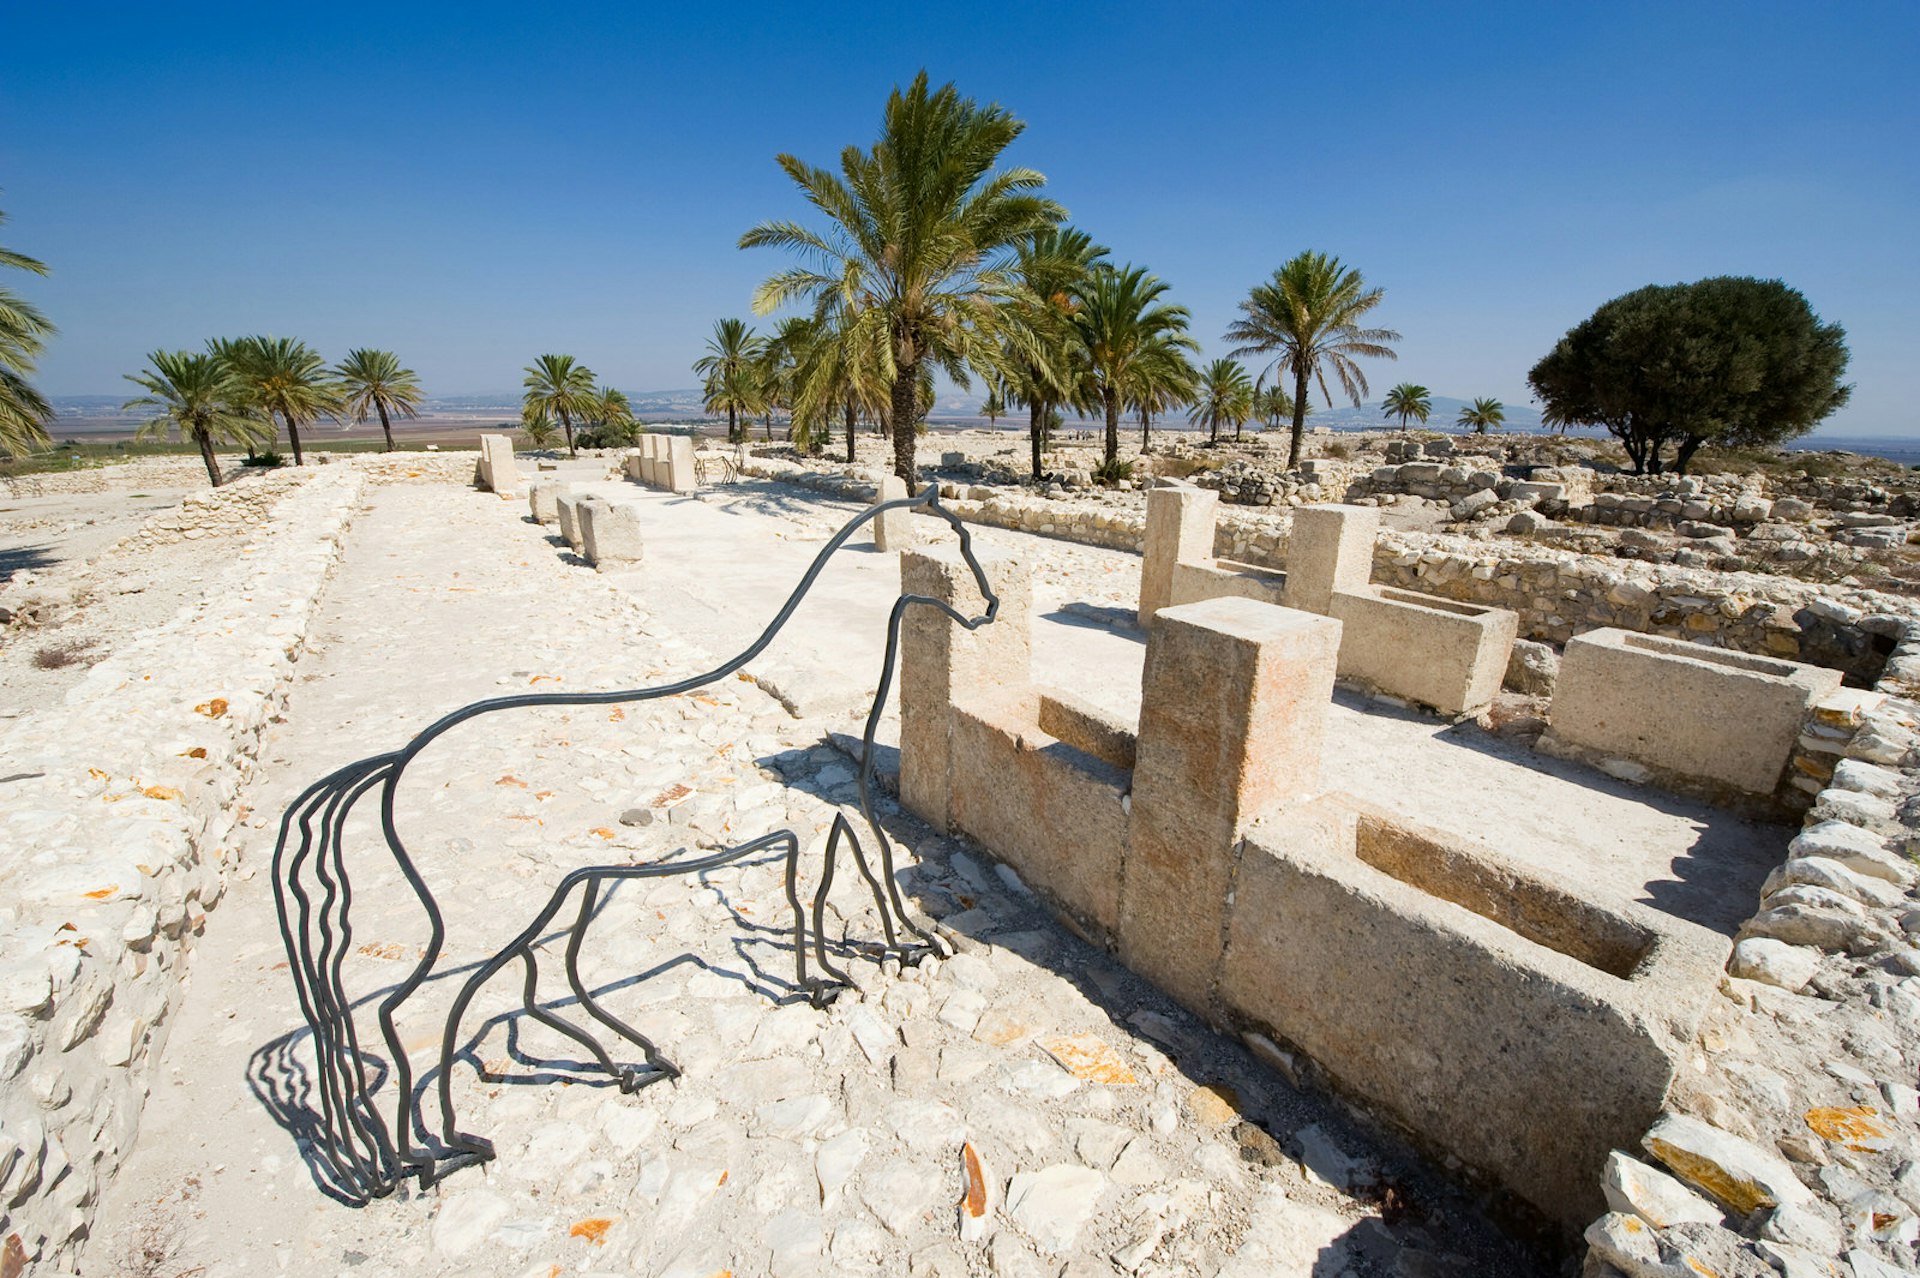 The reconstructed southern stables at Tel Megiddo National Park. Image by Robert Hoetink / Shutterstock